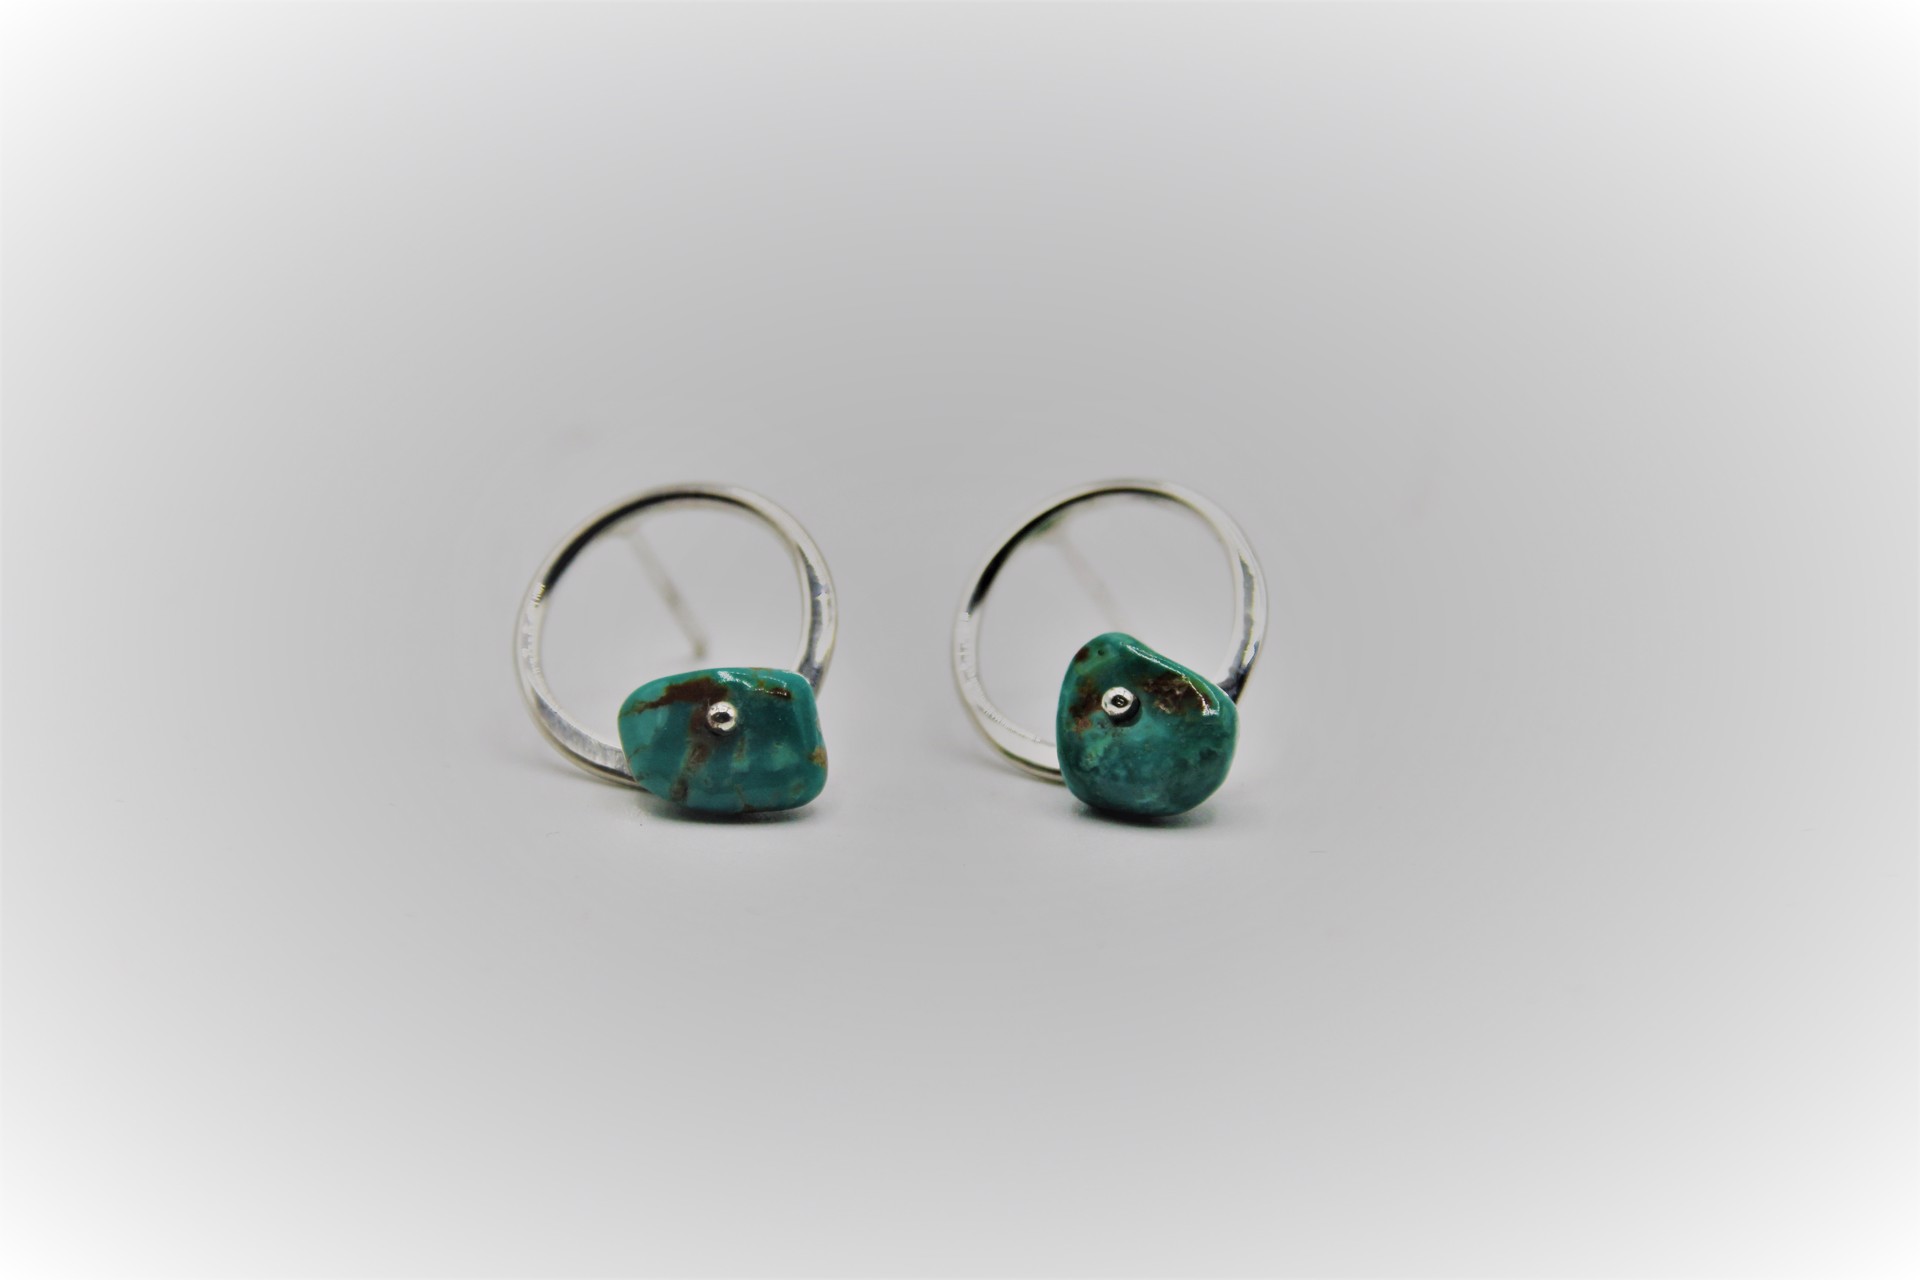 Turquoise Bead Studs by Autumn Fye